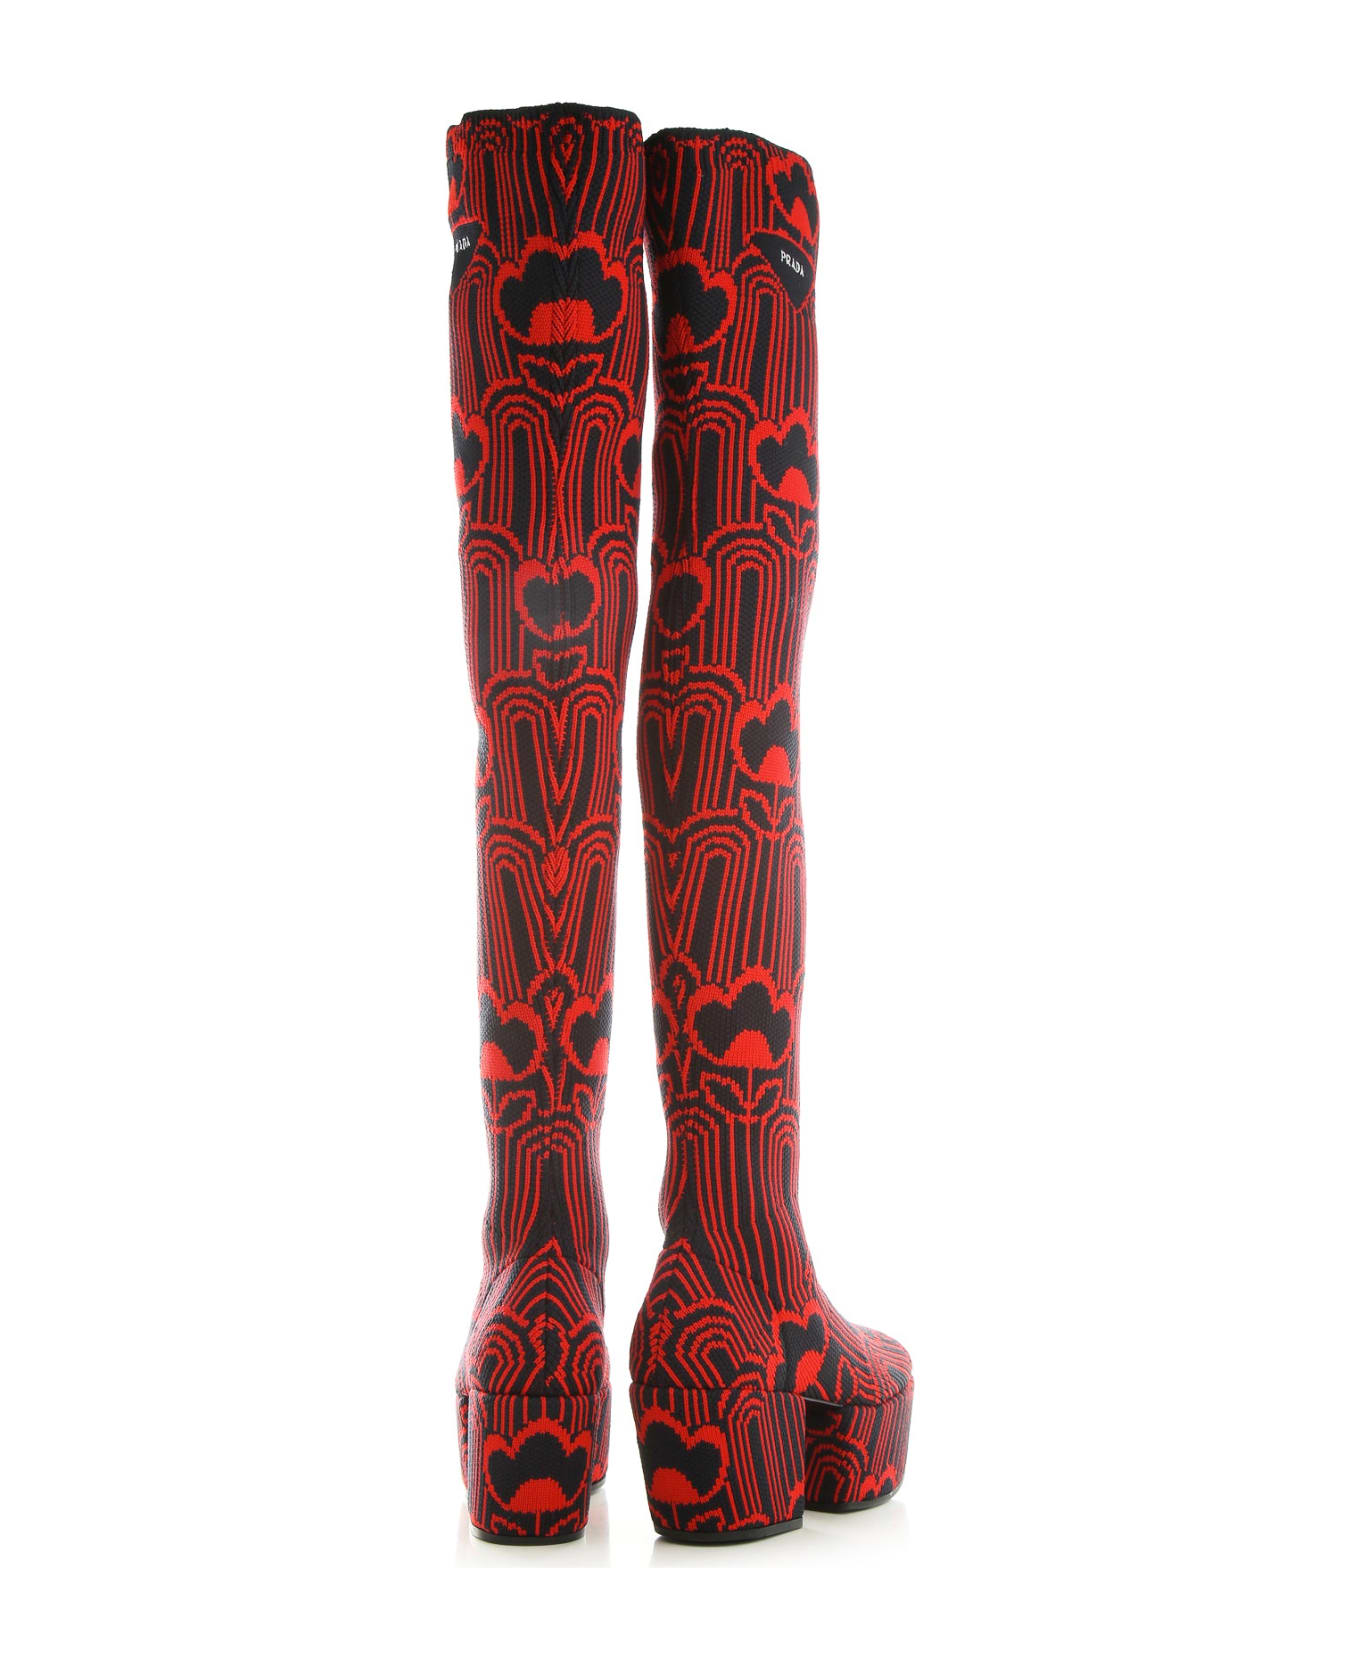 Prada Jaquard Embroidered Boots - Red ブーツ